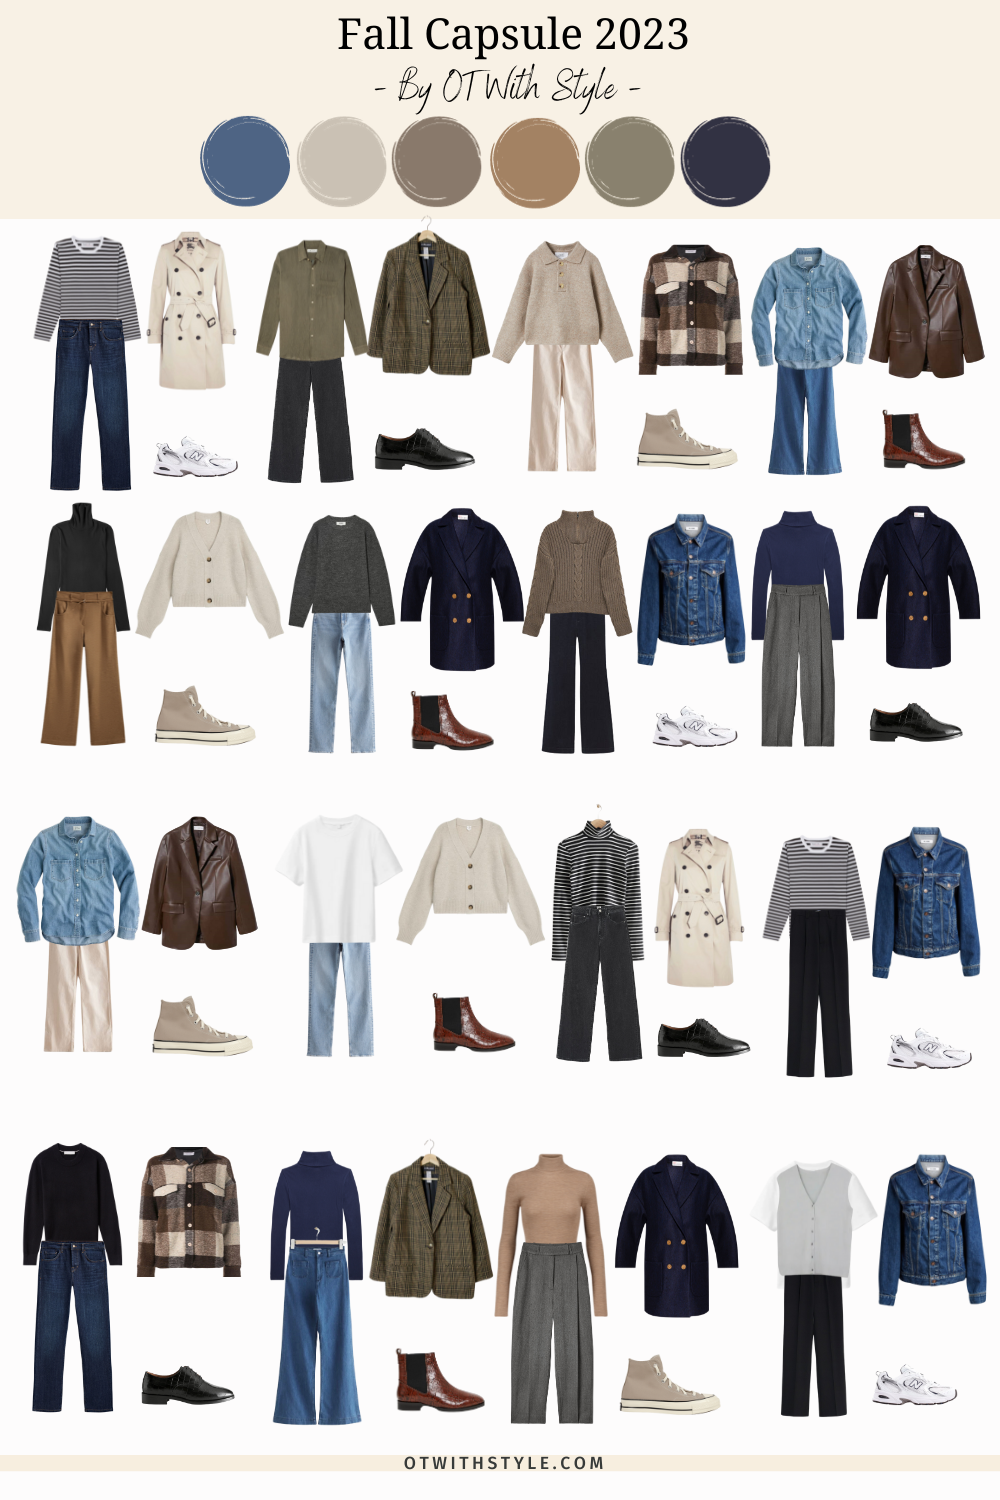 Fall capsule outfit inspiration